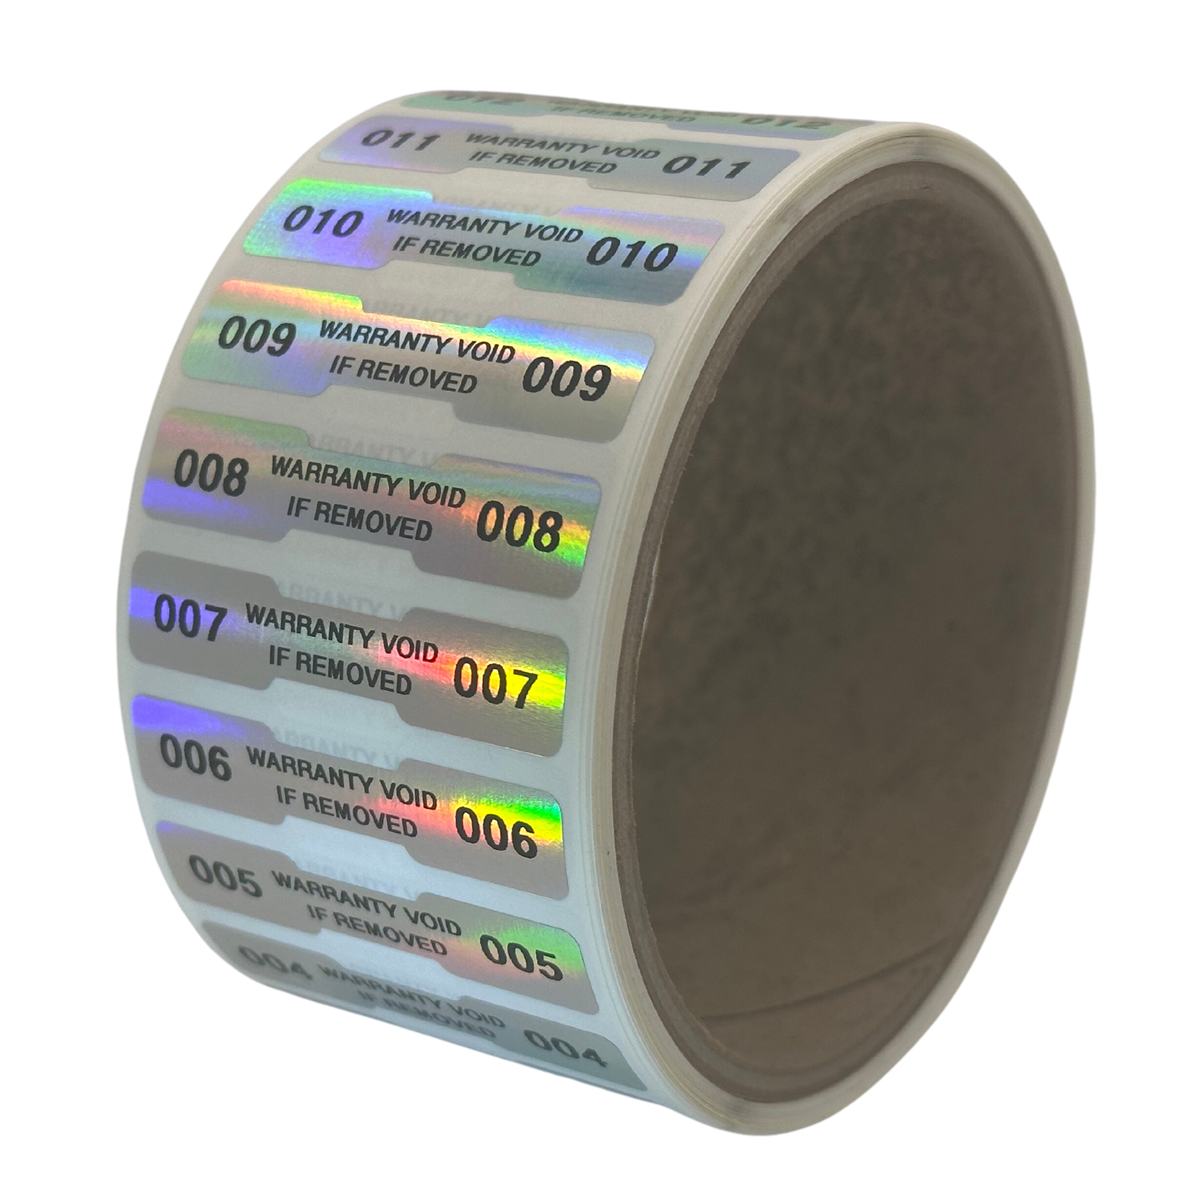 250 Tamper Evident Rainbow Non Residue Security Labels TamperGuard® Seal Sticker, Dogbone 1.75" x 0.375" (44mm x 9mm). Printed: Warranty Void if Removed + Serialized